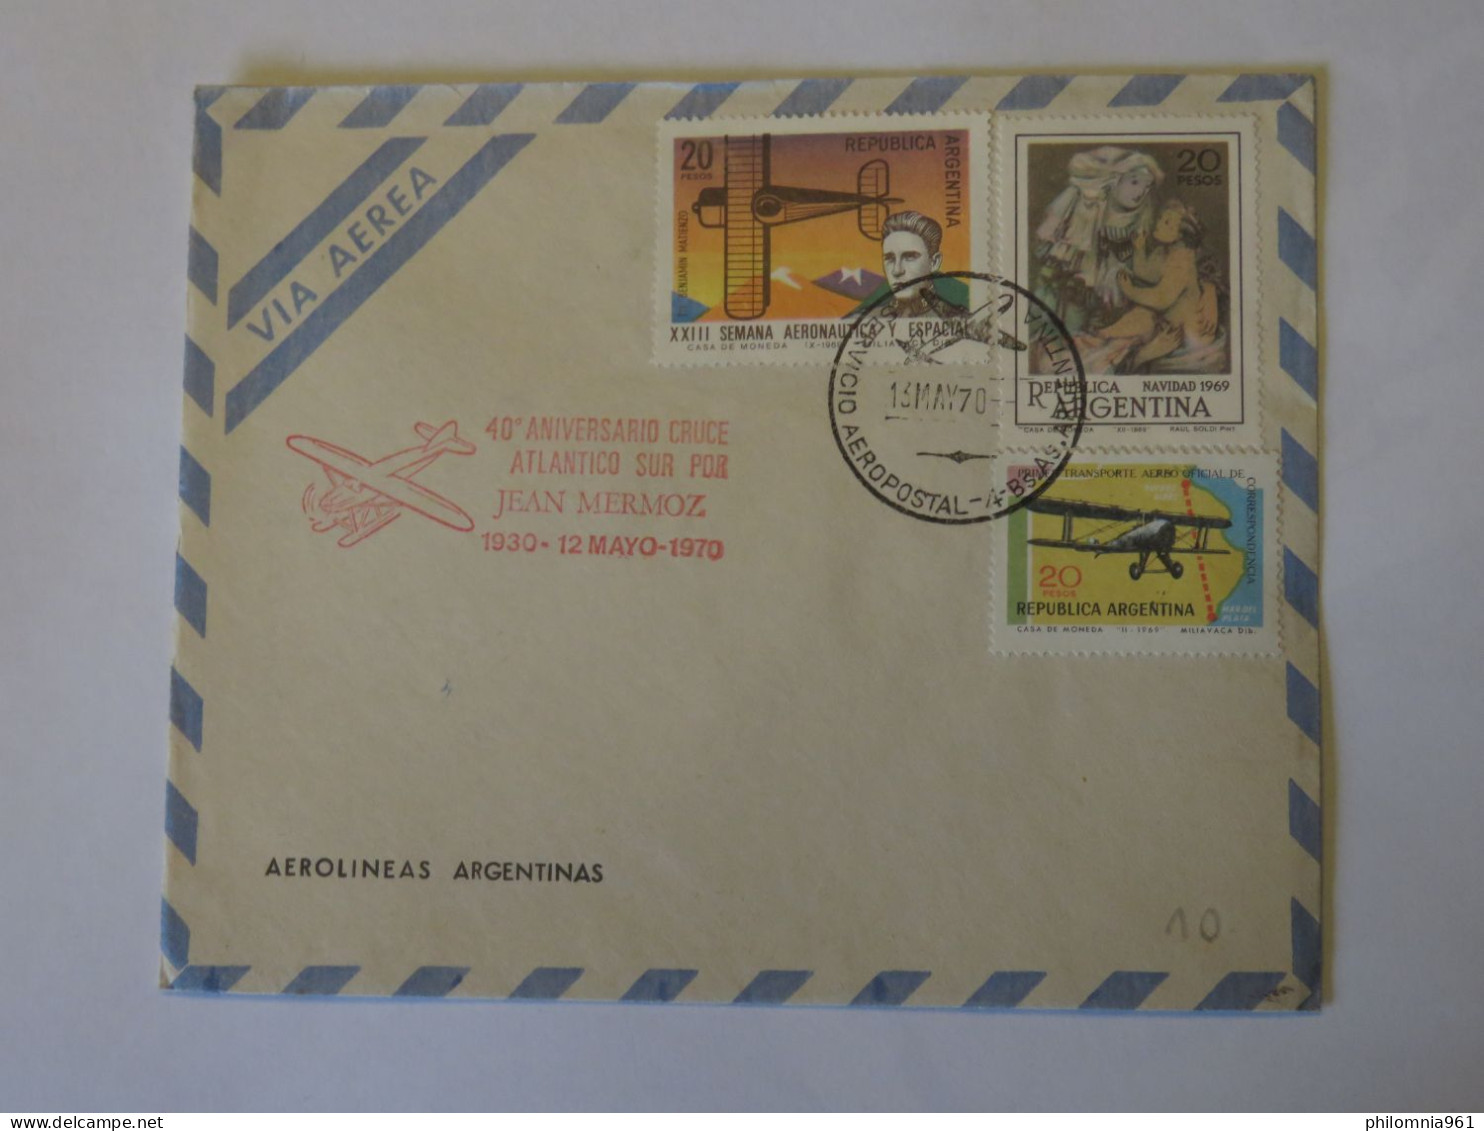 ARGENTINA  40 SOUTH ATLANTIC CROSSING ANNIVERSARY BY JEAN MERMOZ FLIGHT  FIRST FLIGHT COVER 1970 - Used Stamps